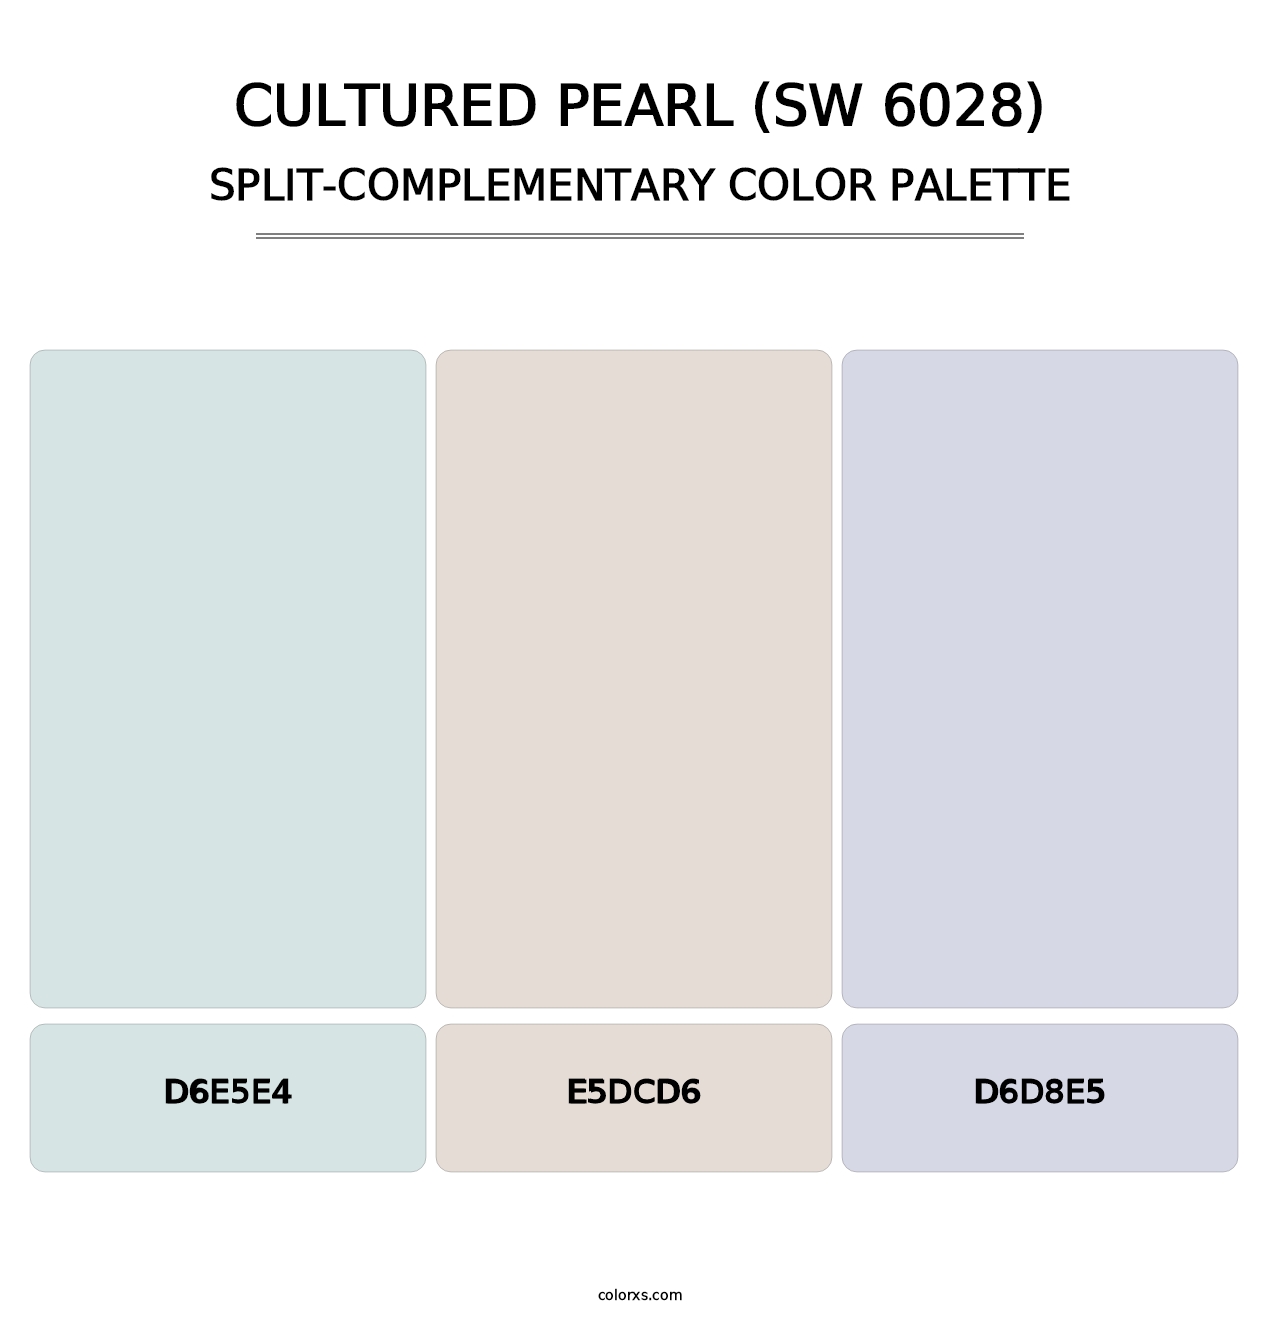 Cultured Pearl (SW 6028) - Split-Complementary Color Palette